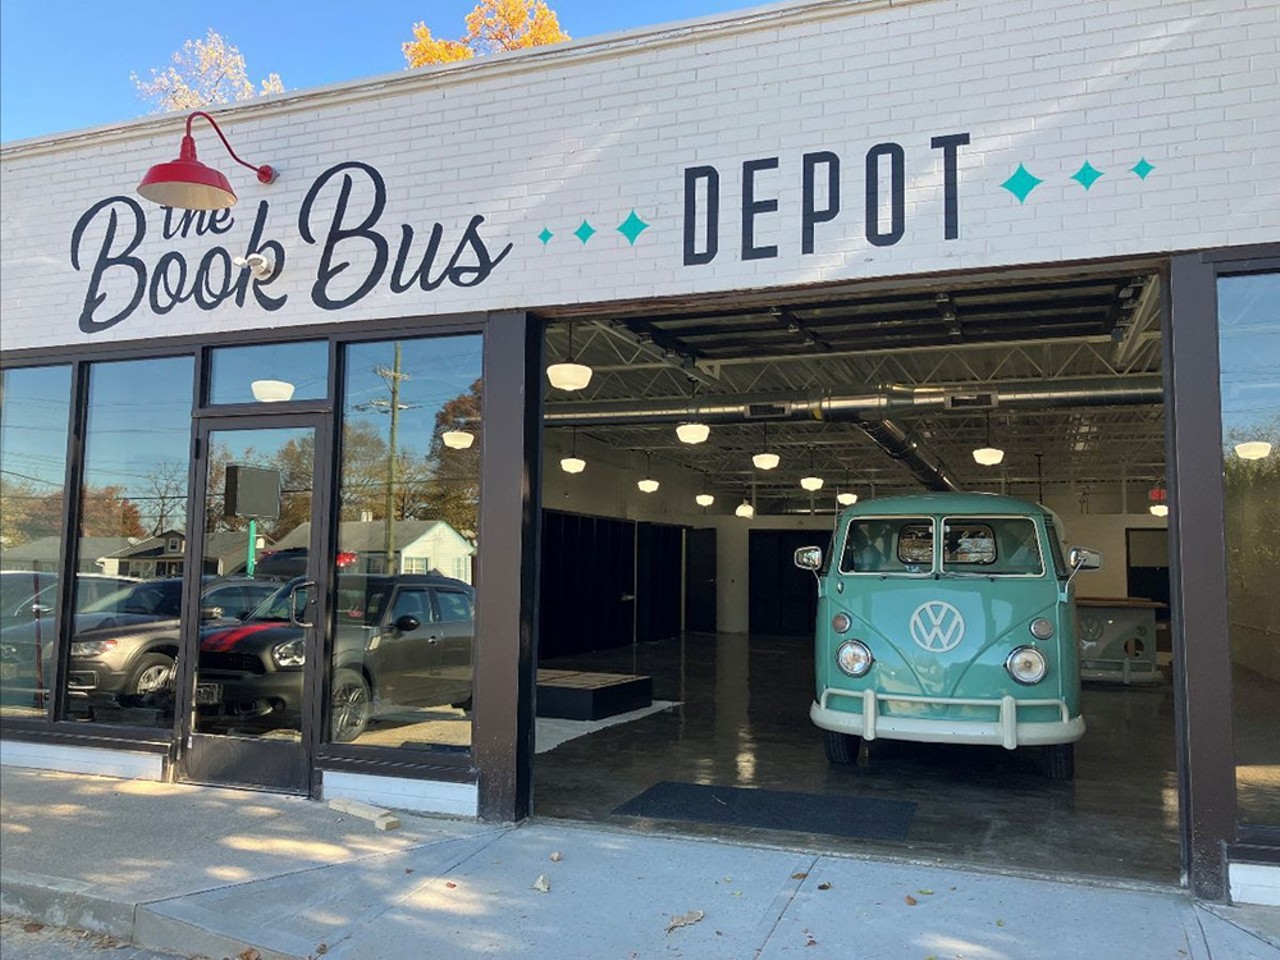 Book Bus Depot Grand Opening
10 a.m.-4 p.m. Nov. 12
Sharonville is getting a new bookstore, but not just any run-of-the-mill-kind. This one's ready to roll, being a 1962 VW pickup truck. The grand opening of the Book Bus' first brick-and-mortar location will include a ribbon-cutting celebration at 10 a.m. followed by a reading from author Julie Whitney of Astra the Lonely Airplane. The depot is "a 5,000 SF facility with garage doors in front, will be home to the book bus, and will offer all genres, in both new and used books," according to a release.Nov. 12. 10 a.m.-4 p.m. The Book Bus Depot, 10936 Reading Rd., Sharonville.